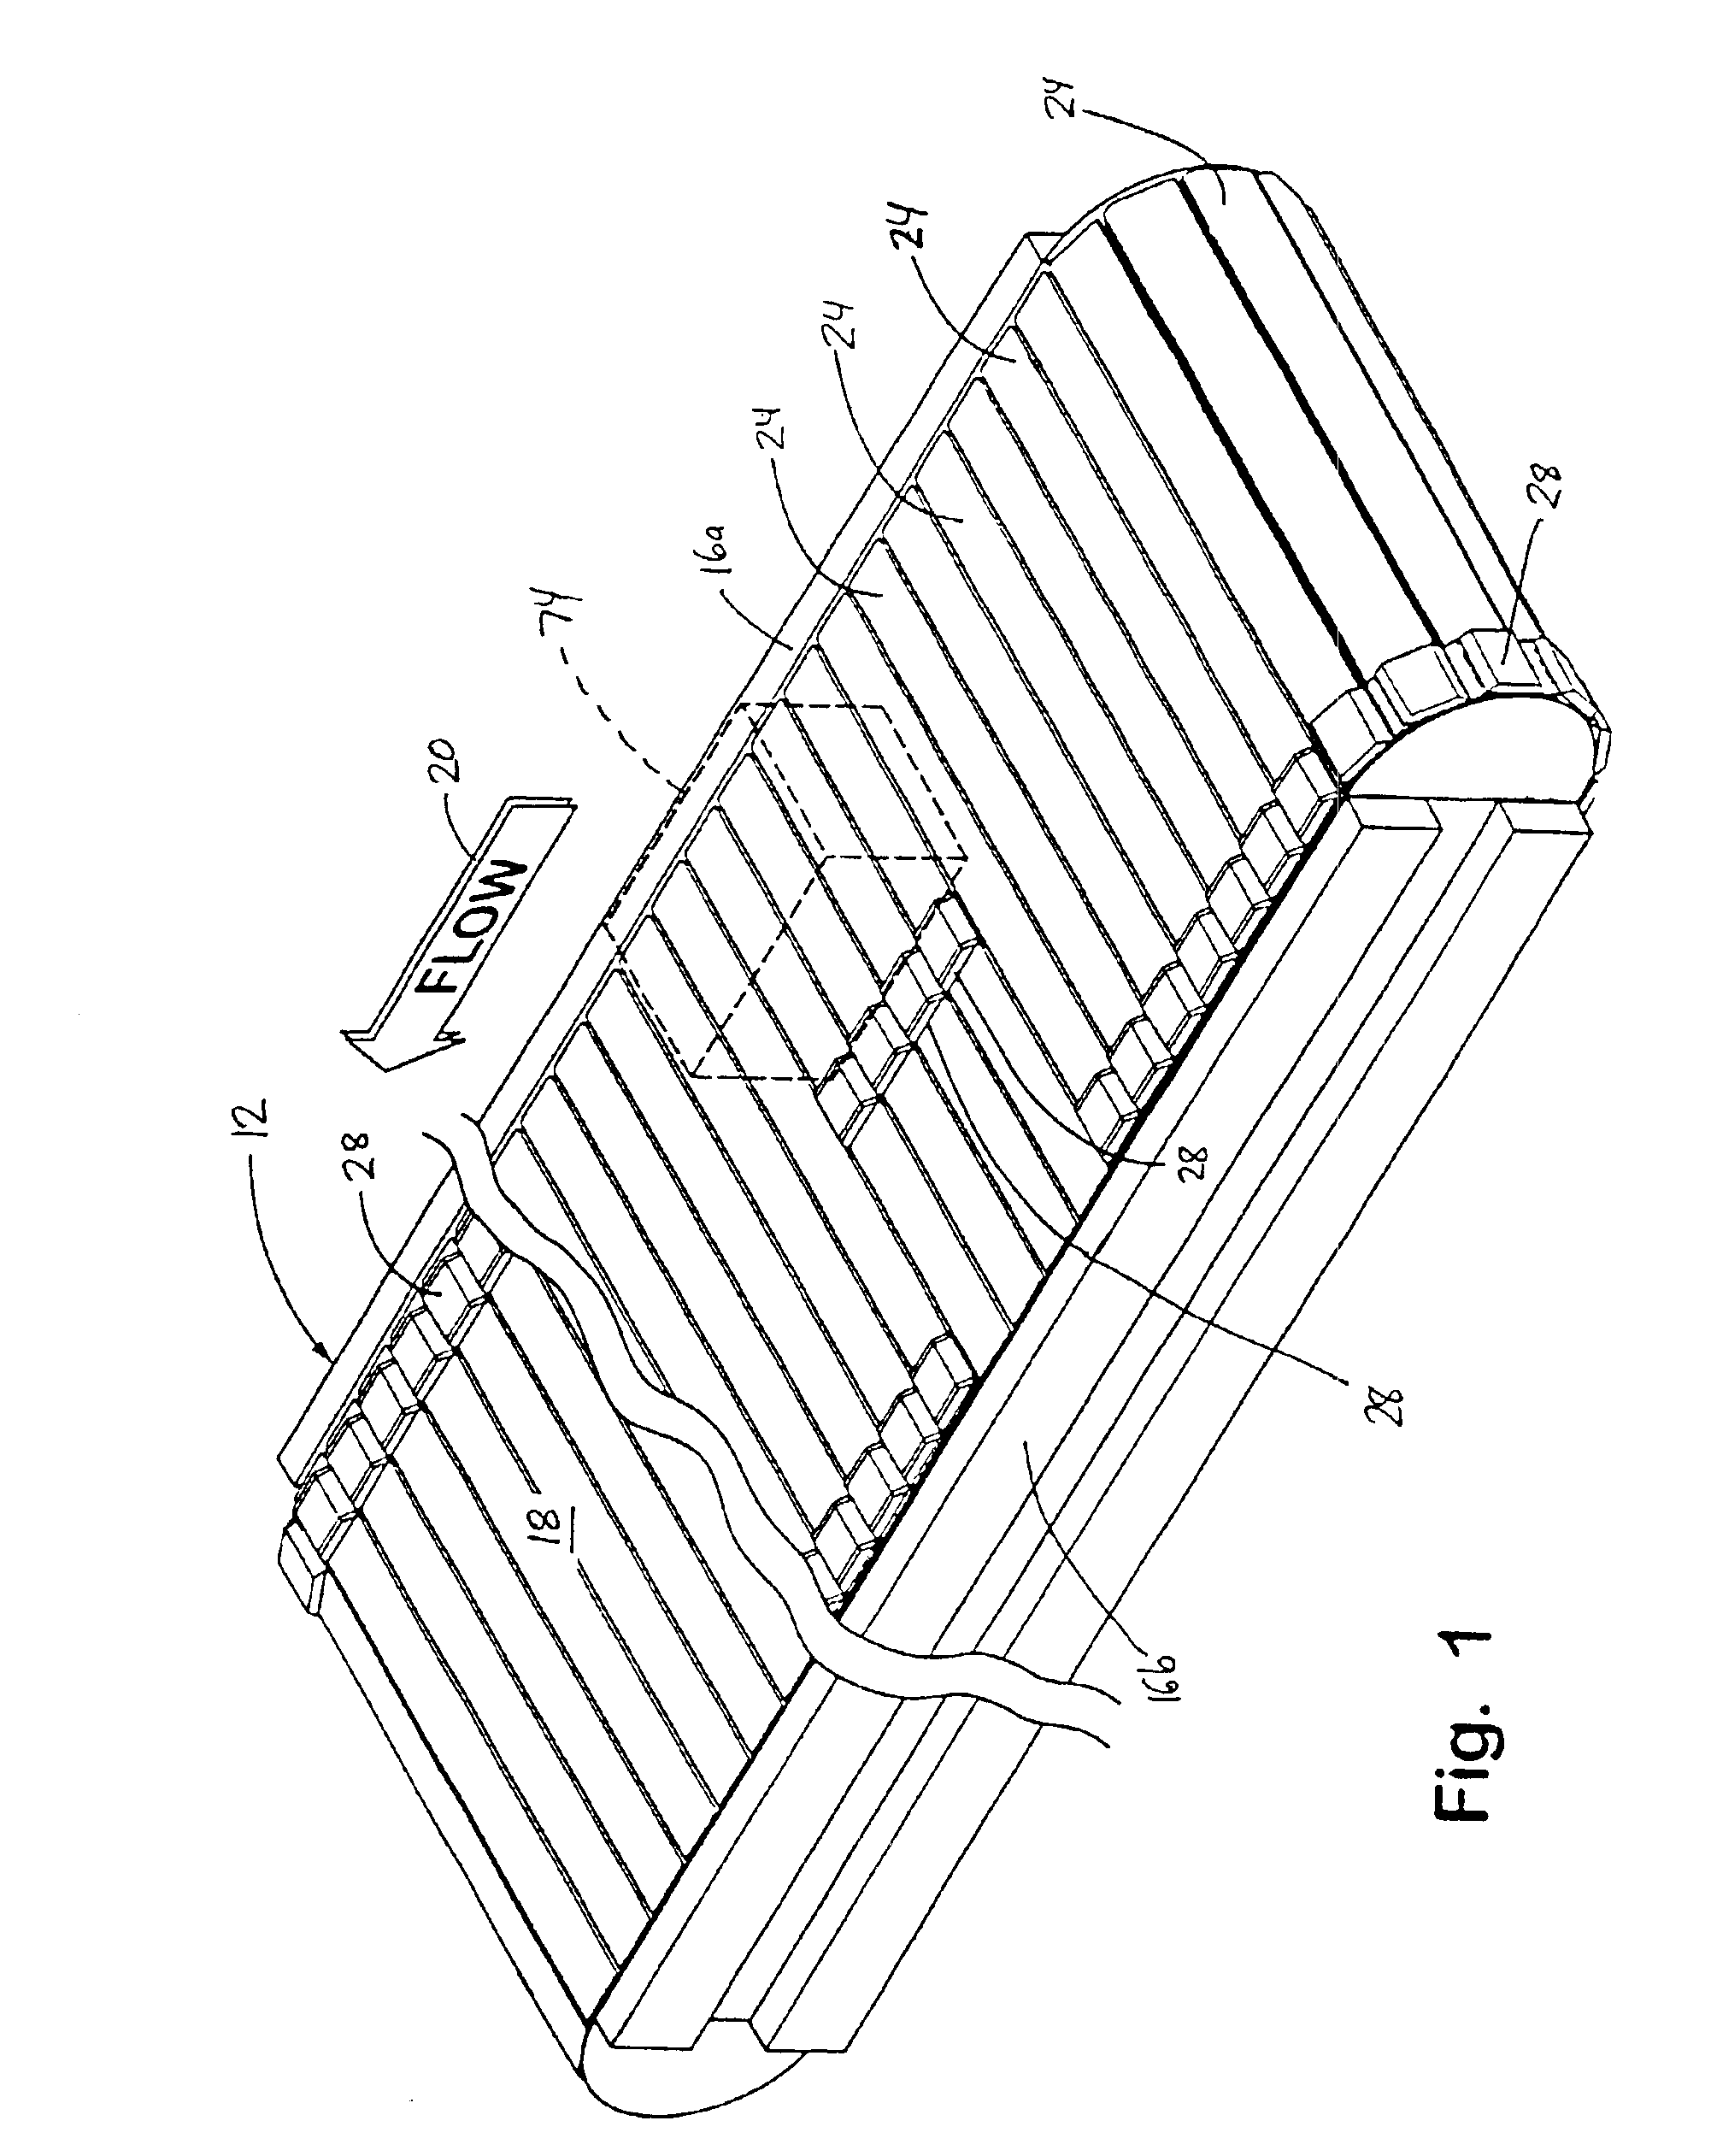 Conveyor system with diverting track network